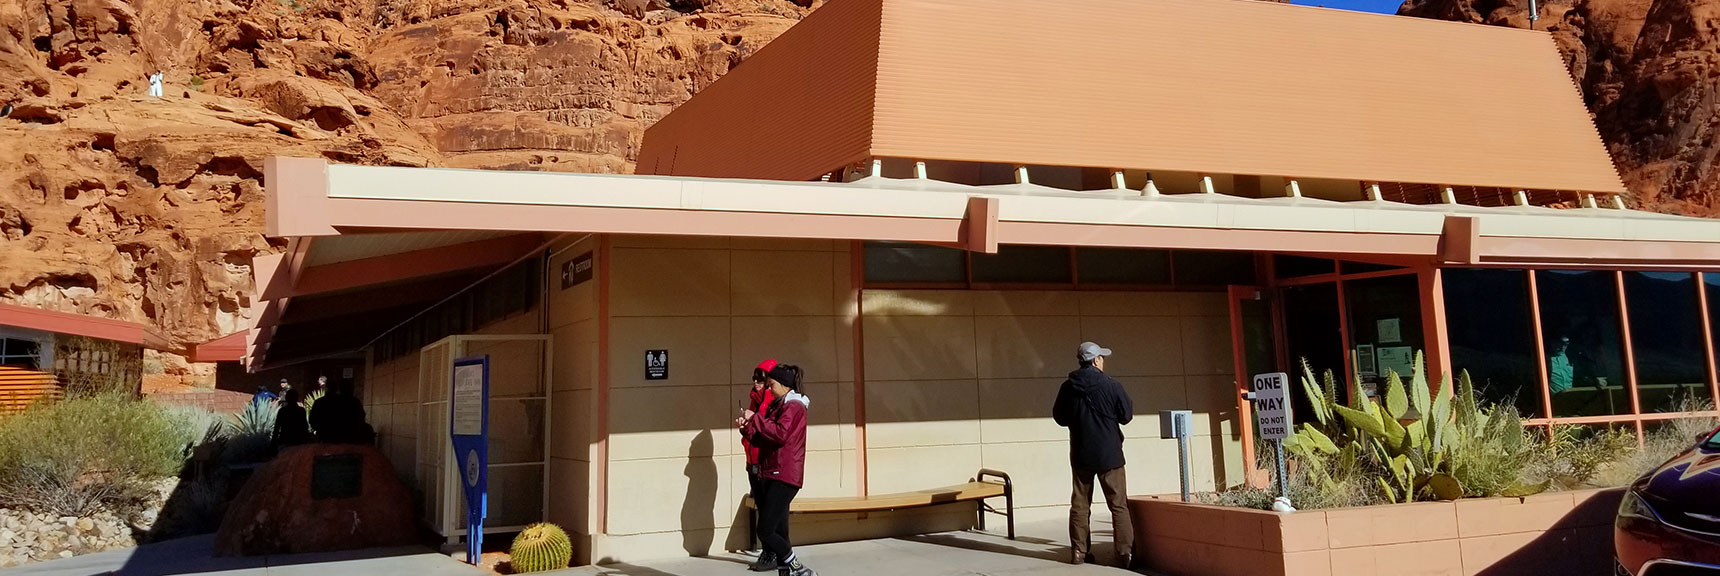 Visitors Center at Valley of Fire State Park, Nevada